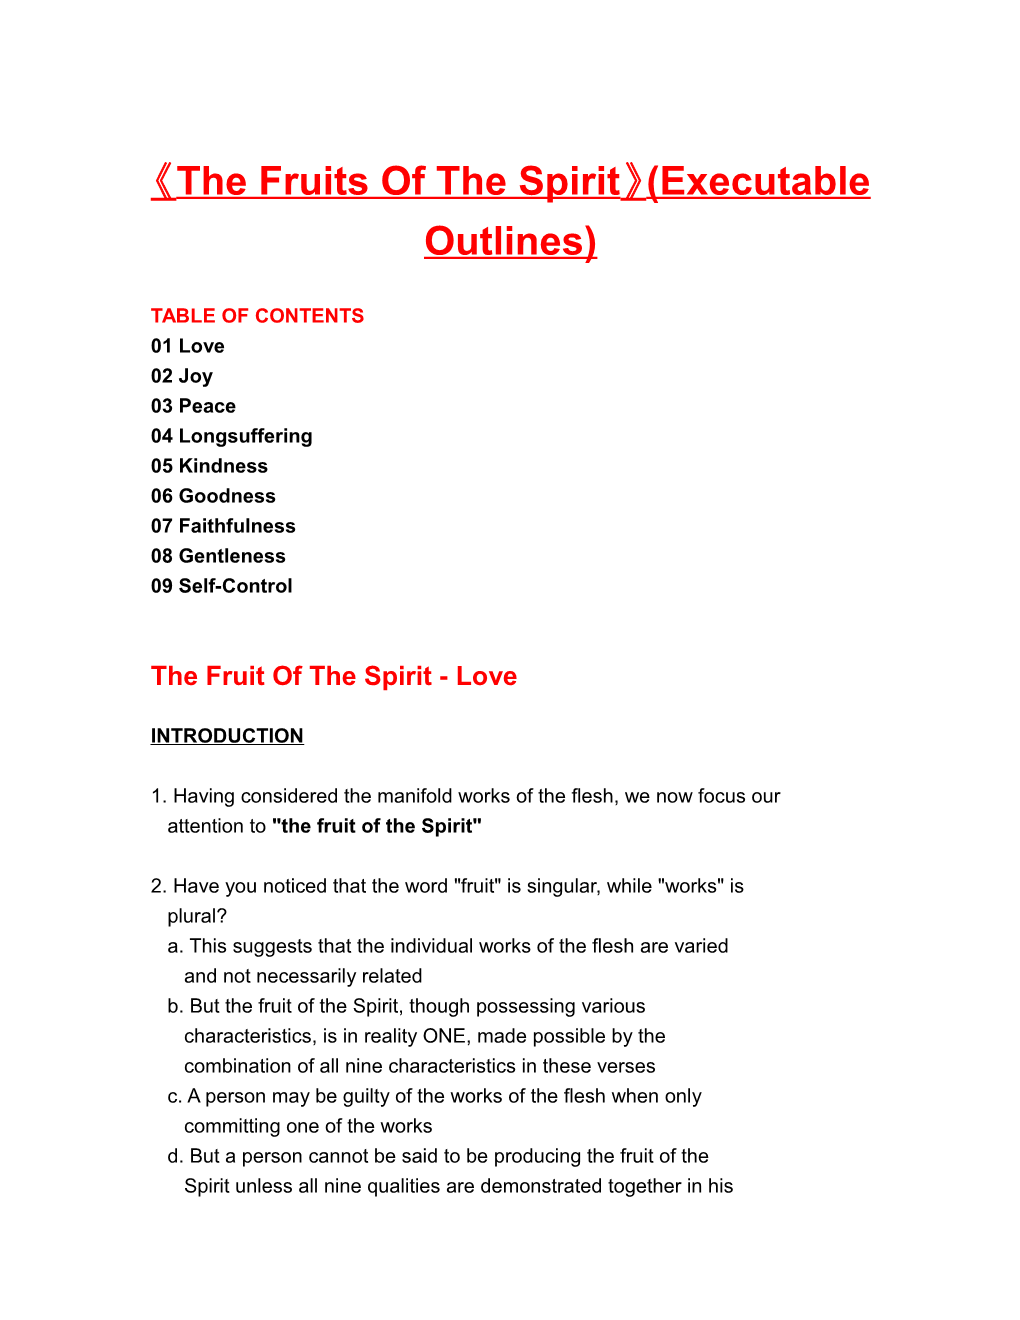 The Fruits of the Spirit (Executable Outlines)